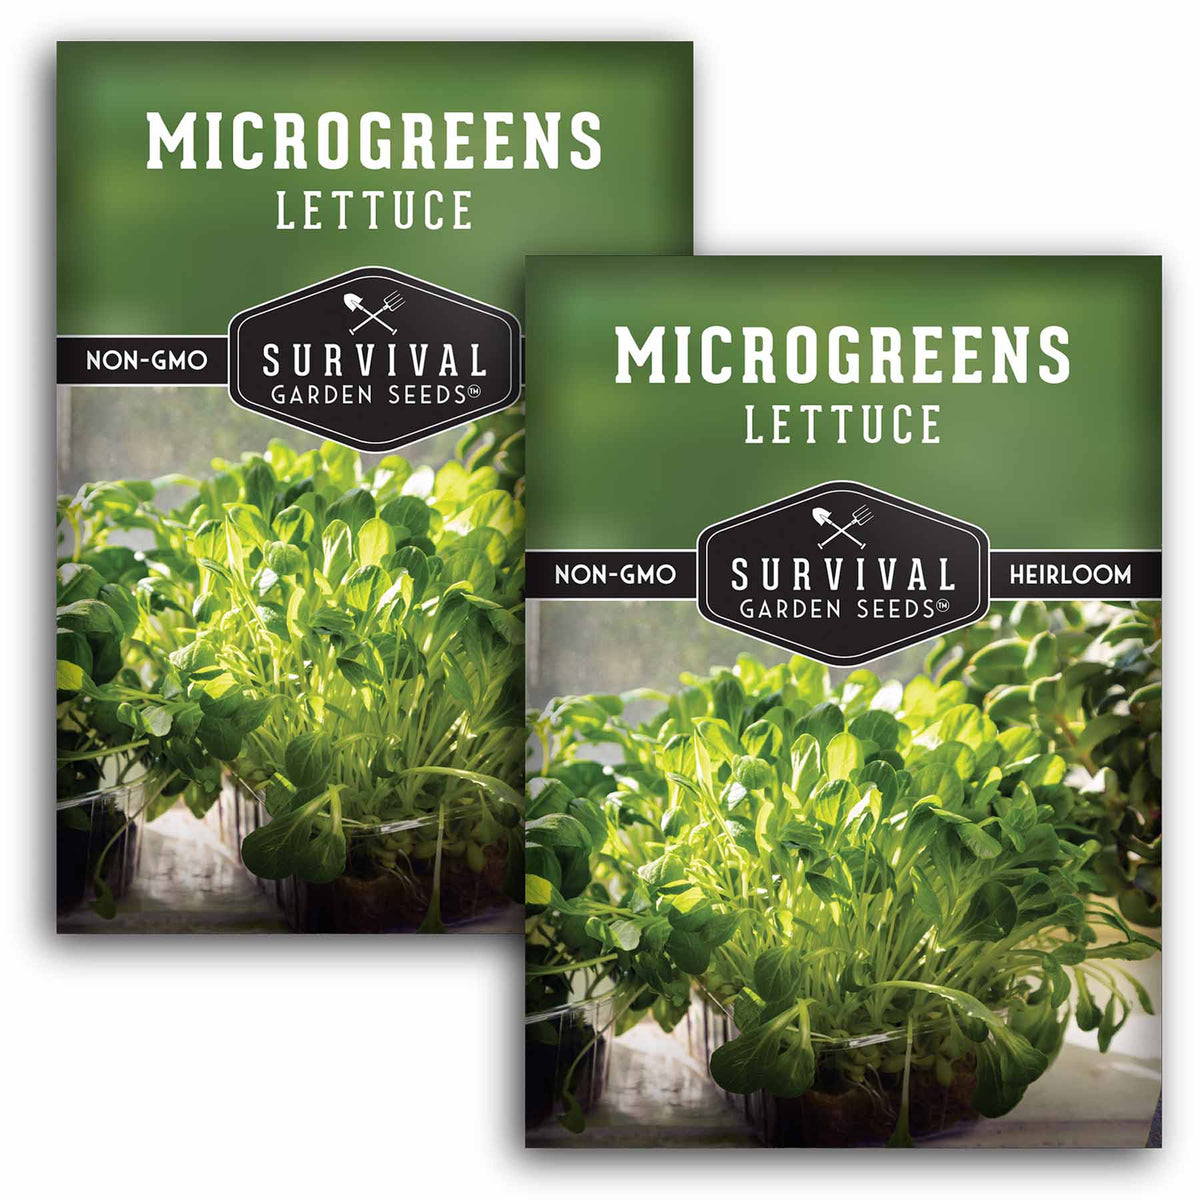 2 packets of Lettuce Microgreens seeds